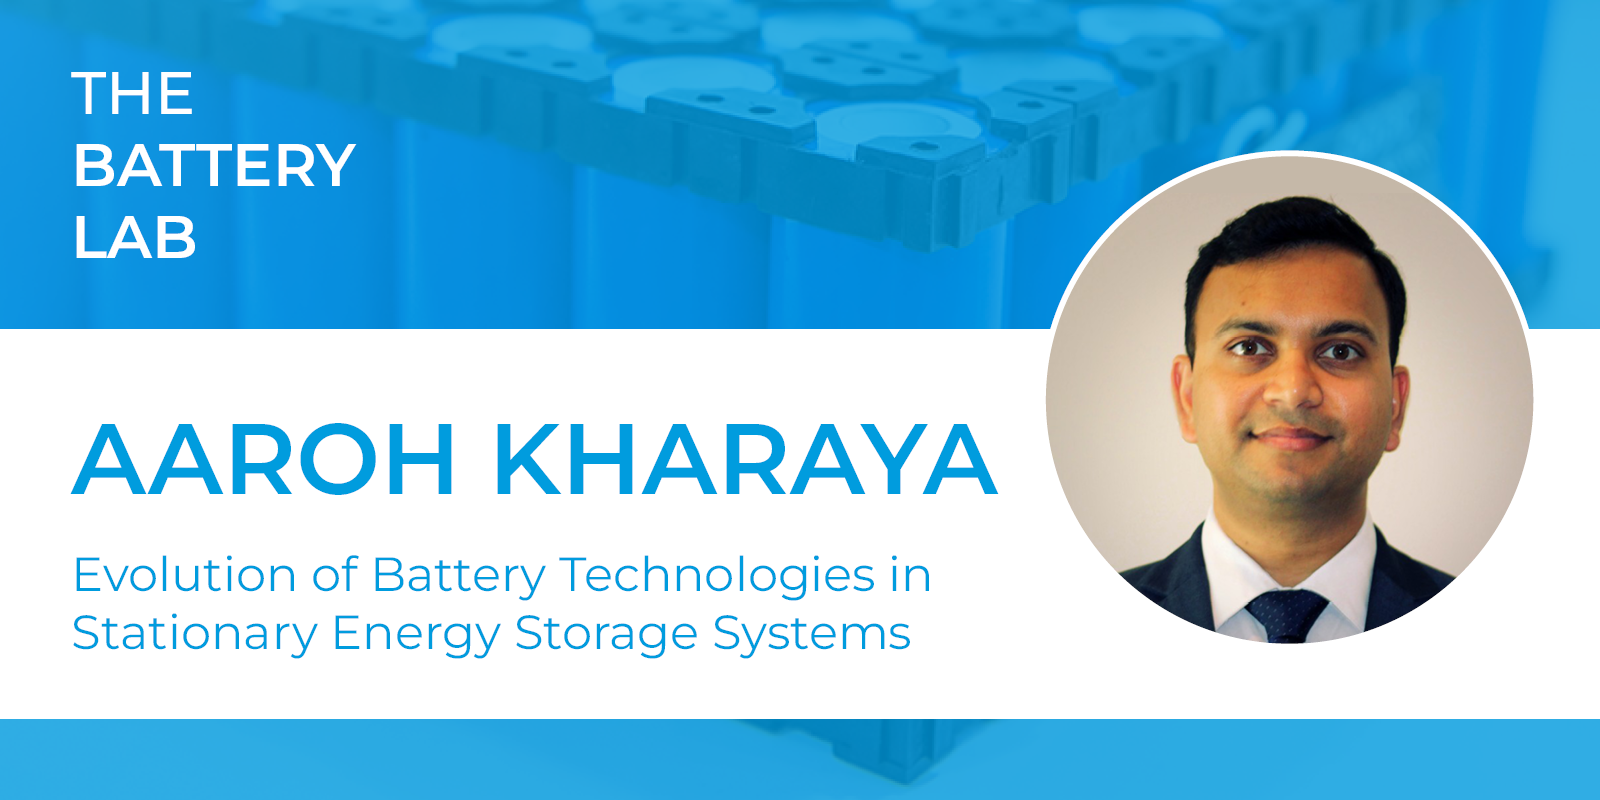 Evolution of Battery Technologies in Stationary Energy Storage Systems with Aaroh Kharaya